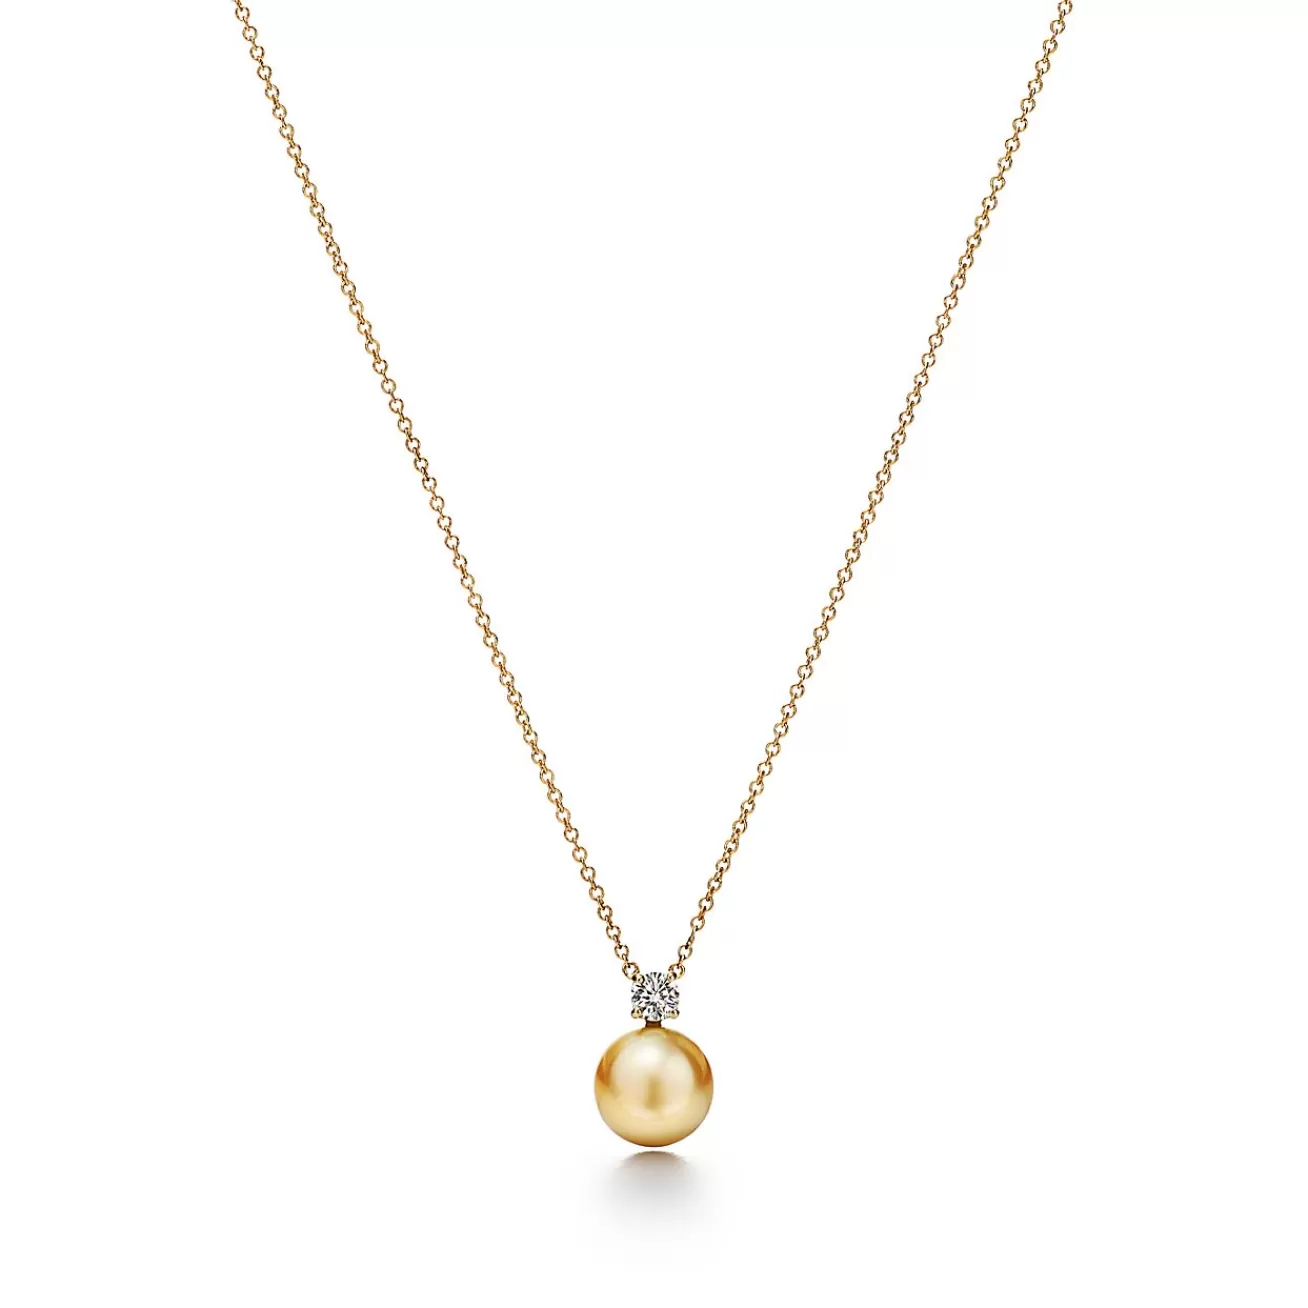 Tiffany & Co. Tiffany South Sea pearl pendant in 18k gold with diamonds. | ^ Necklaces & Pendants | Gold Jewelry